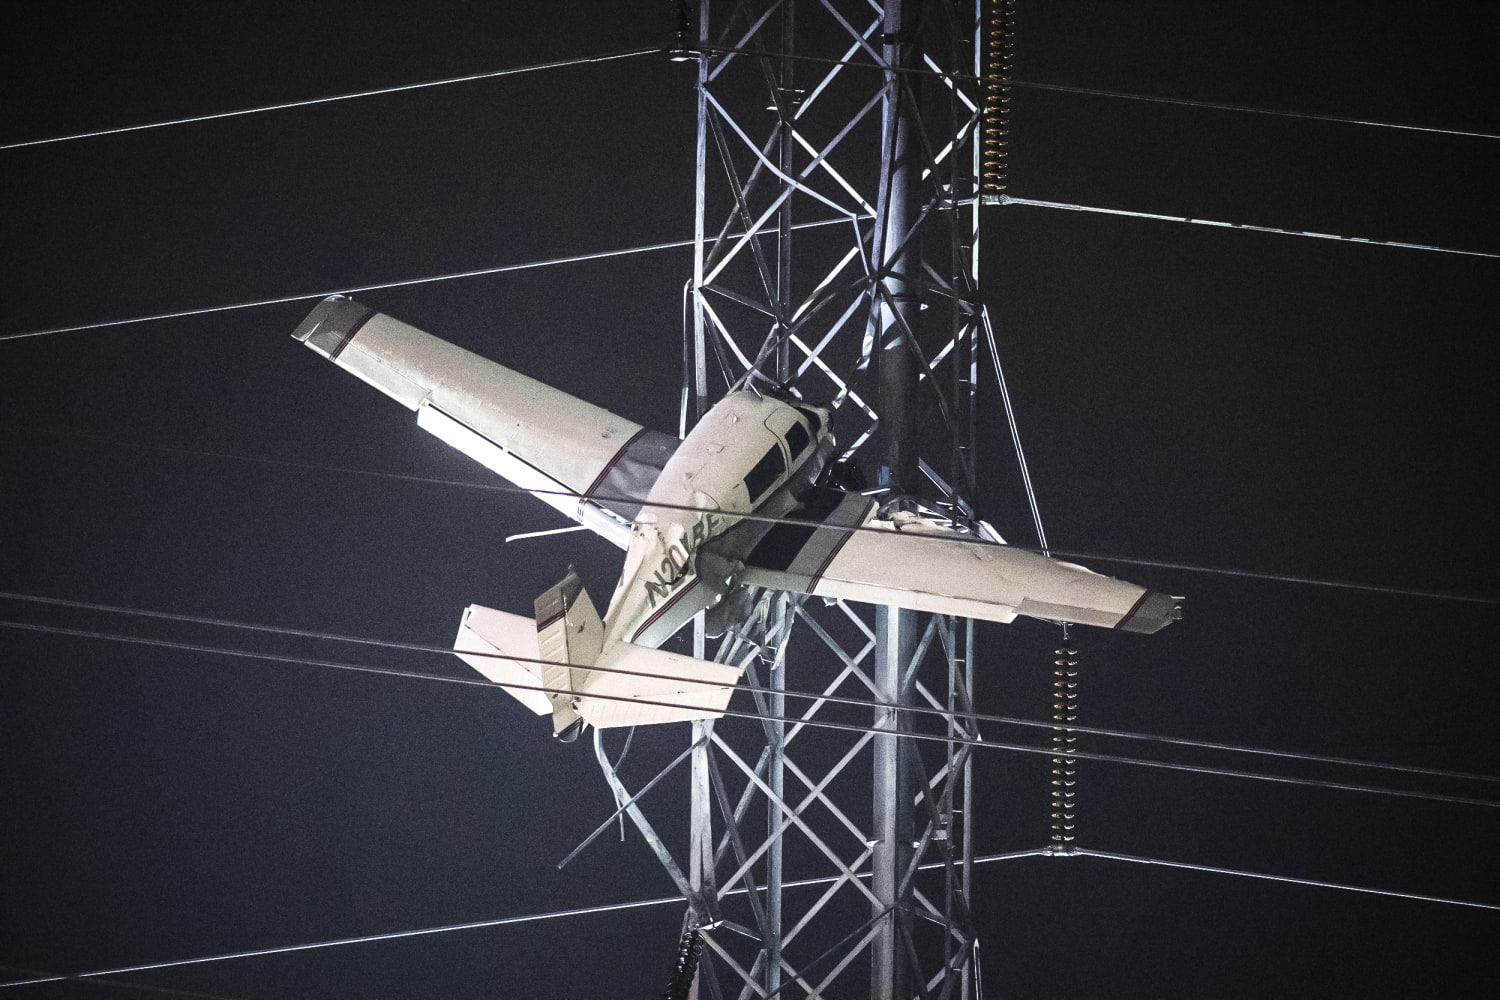 2 rescued from small plane as it dangled 100 feet in the air after hitting a power tower